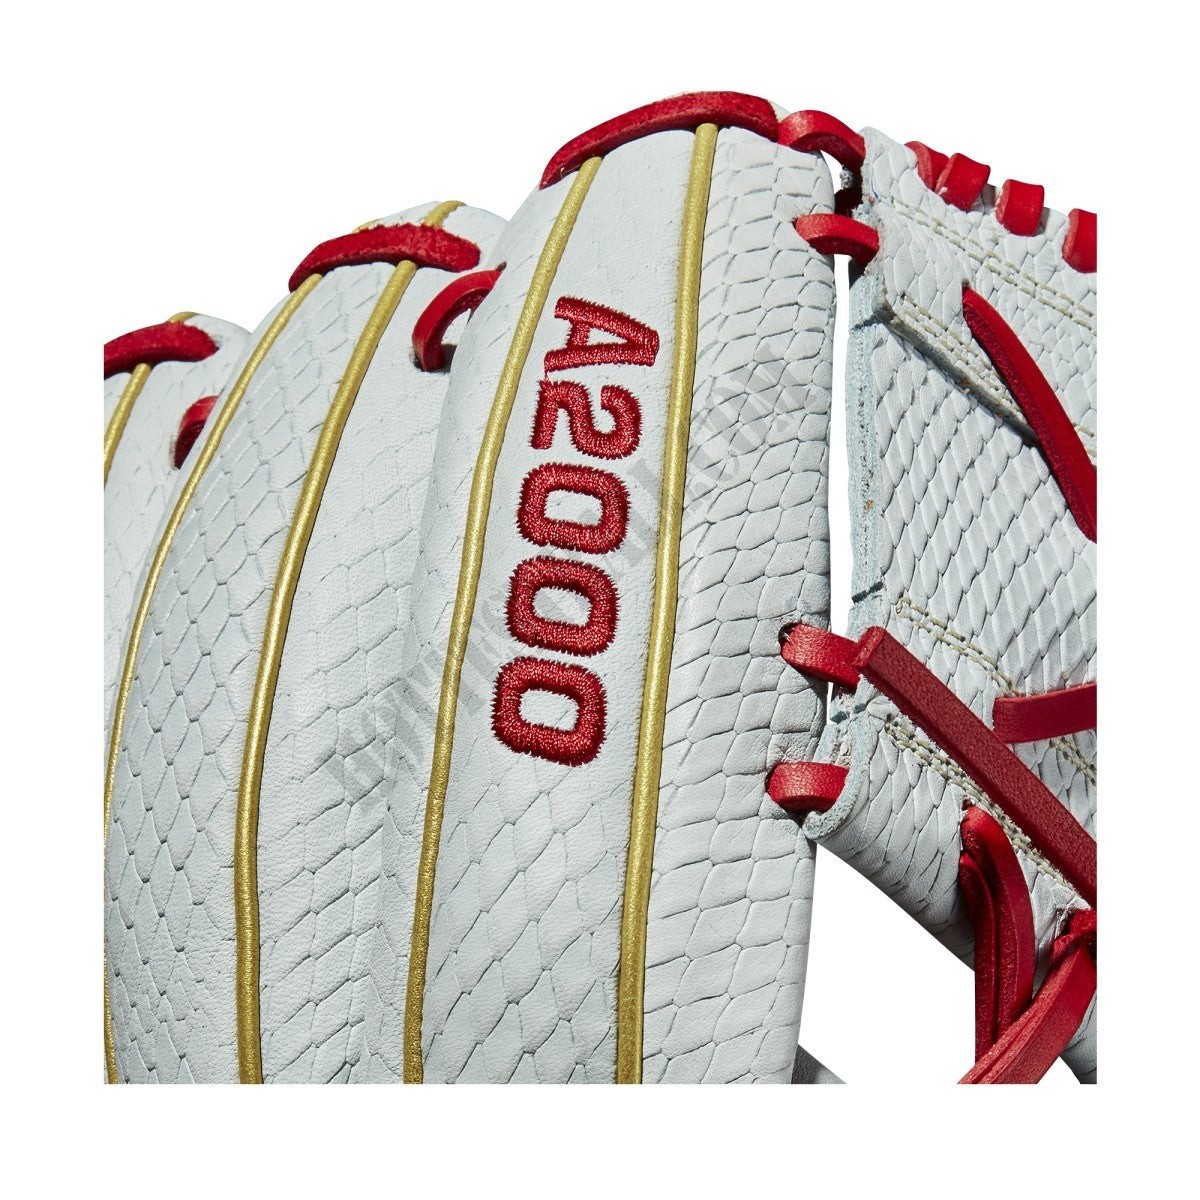 2020 A2000 12" KS7 GM Infield Fastpitch Glove ● Wilson Promotions - -10